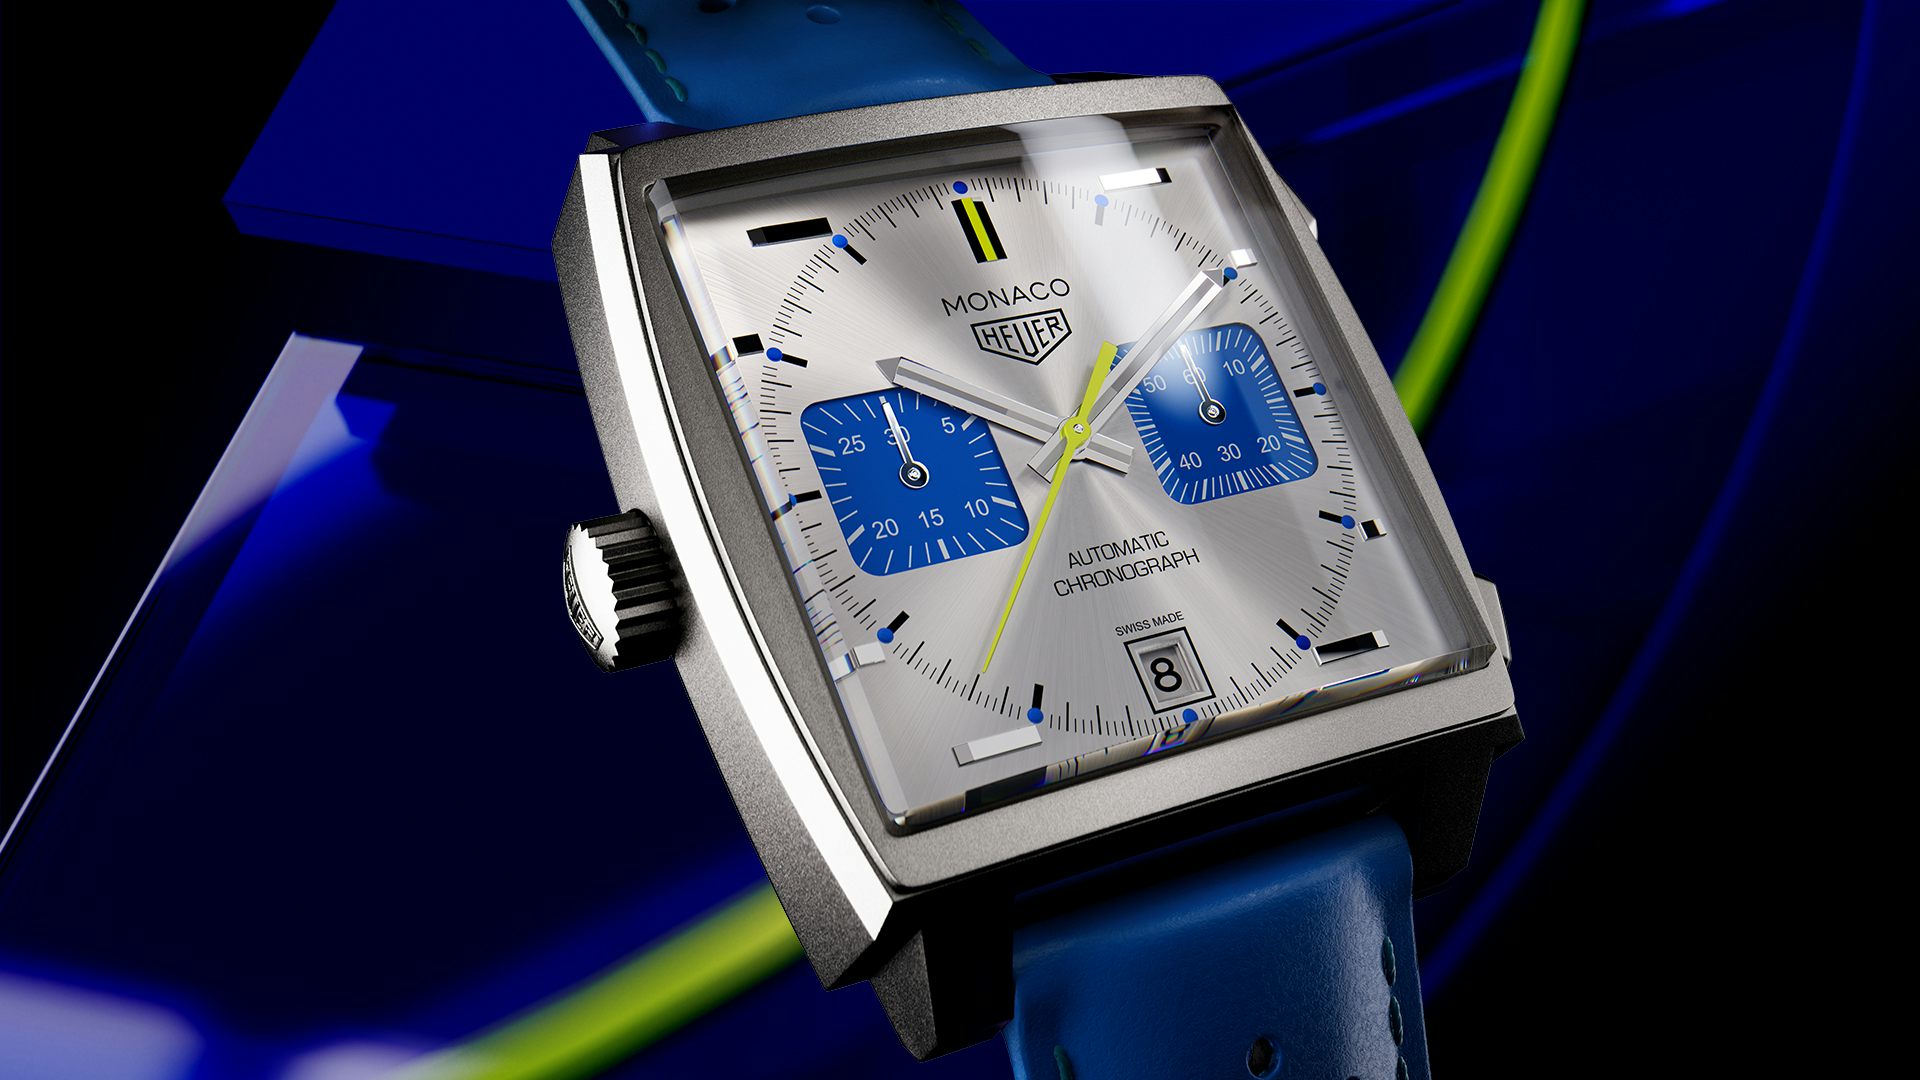 Introducing: TAG Heuer Monaco Chronograph Racing Blue Limited